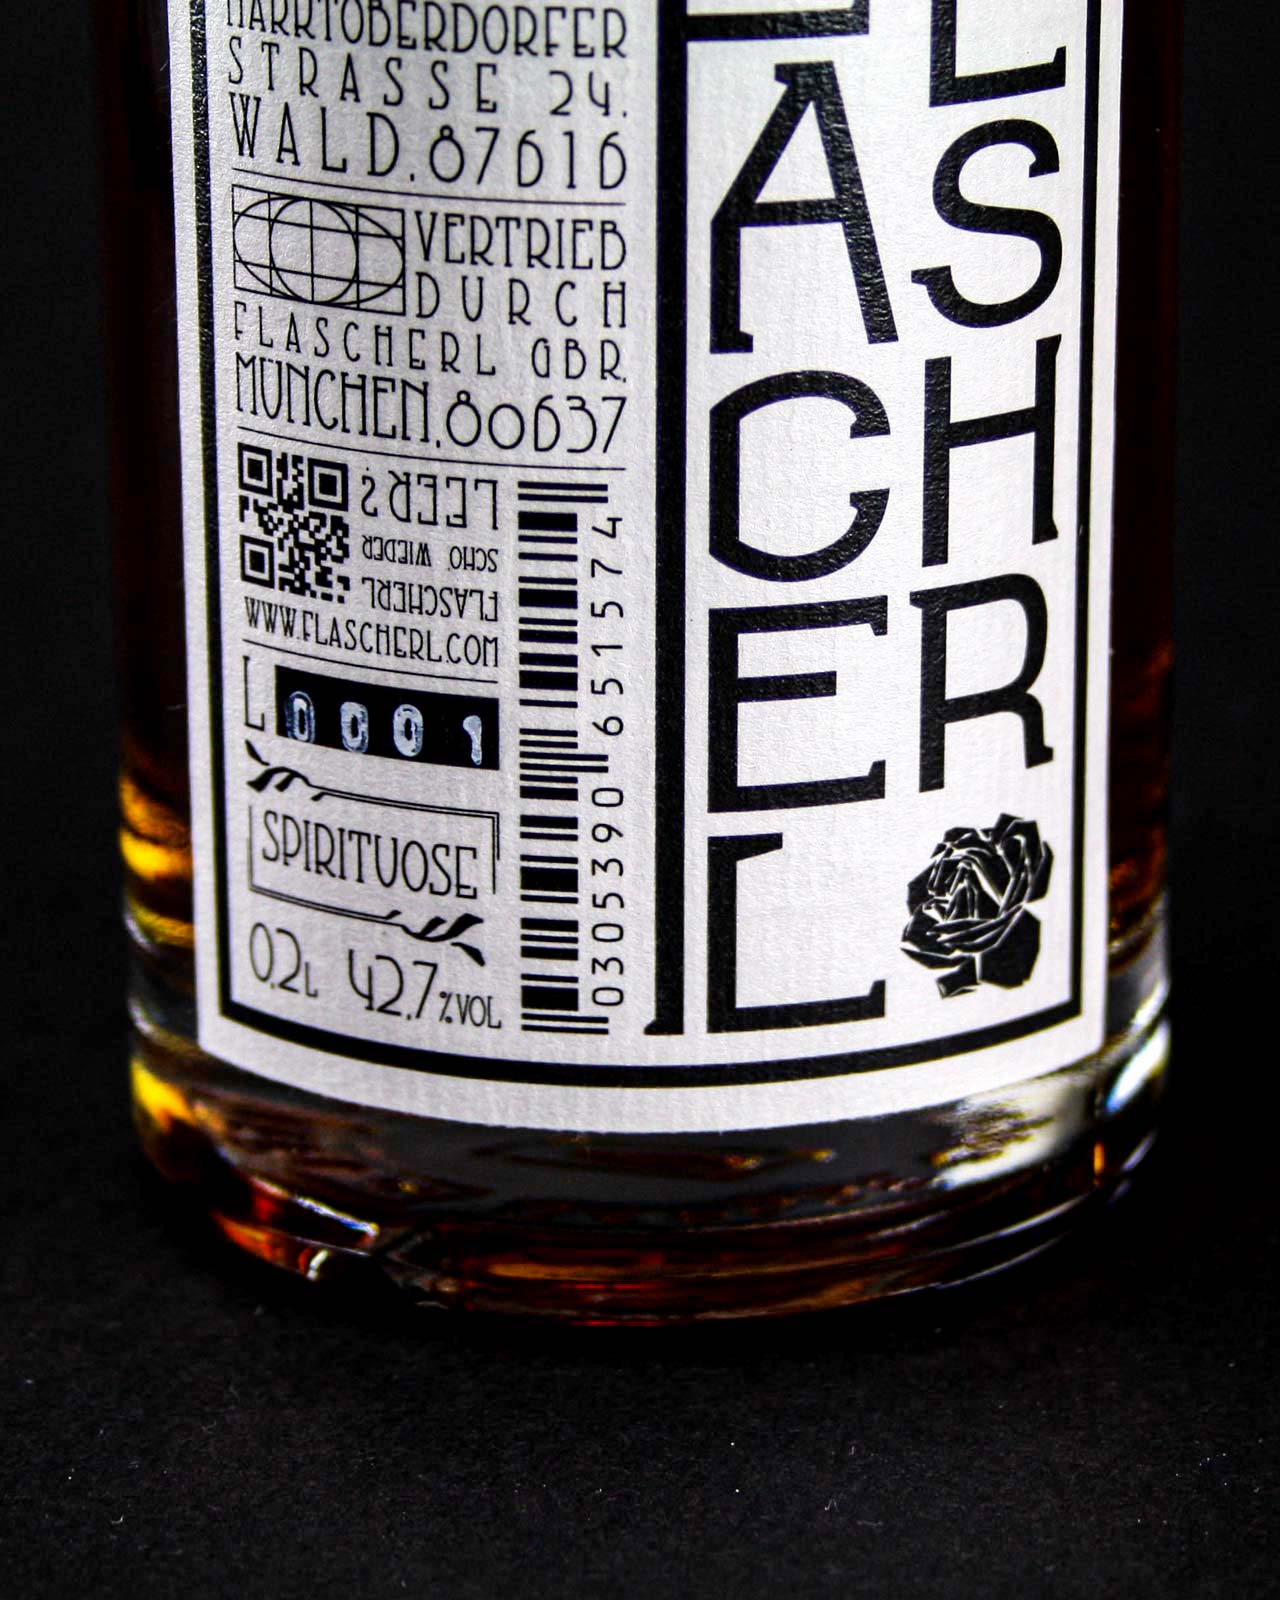 the flascherl spirit corporate identity branding consulting creative strategy art direction packaging typography and corporate font label helvetica boeklin jugendstil art noveau gin lager matured barrel